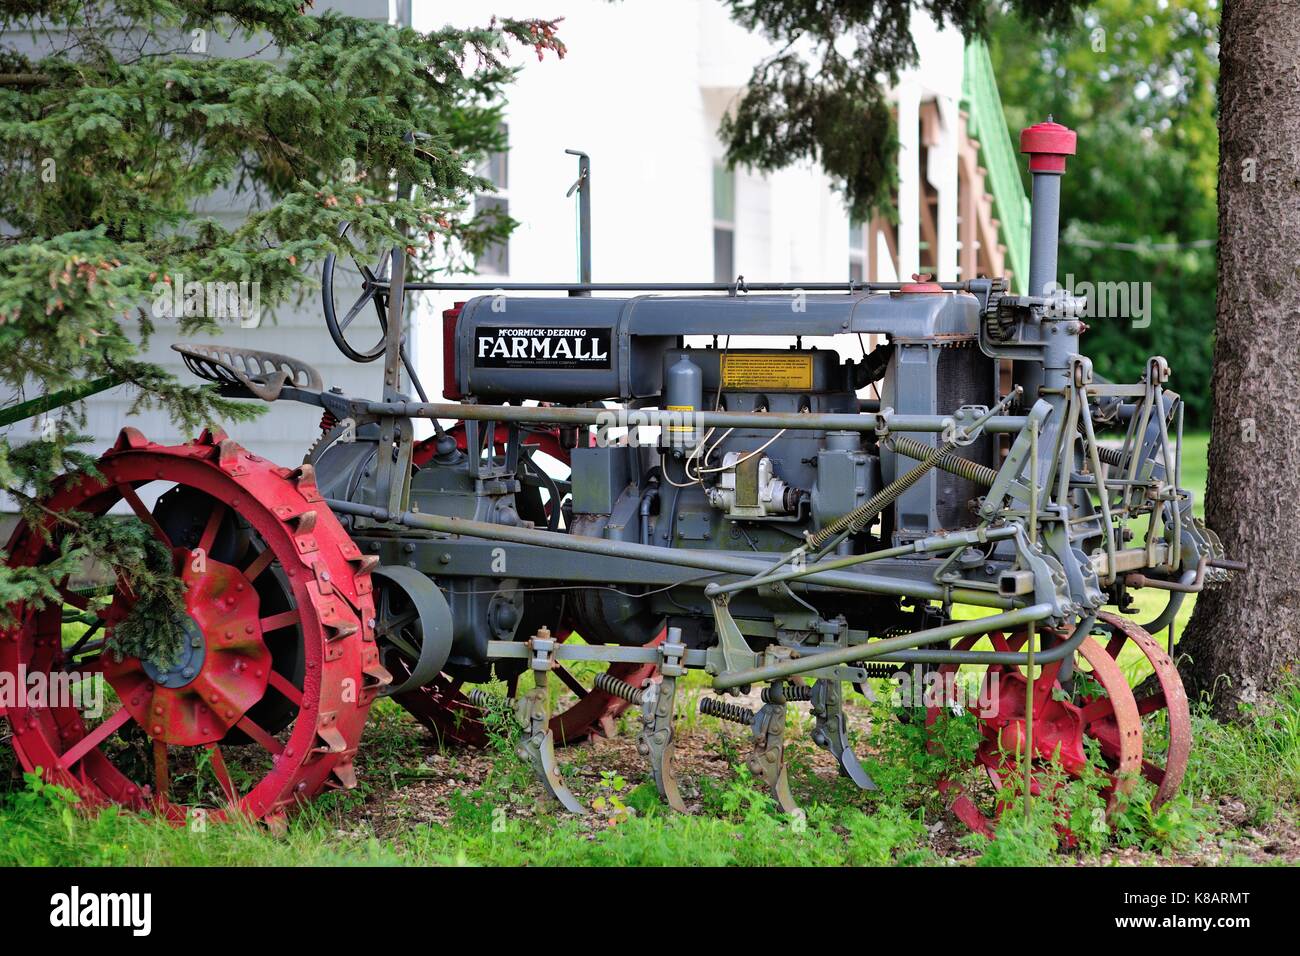 A vintage tractor relegated to non use among grass and weeds in LaFox, Illinois, USA. Stock Photo